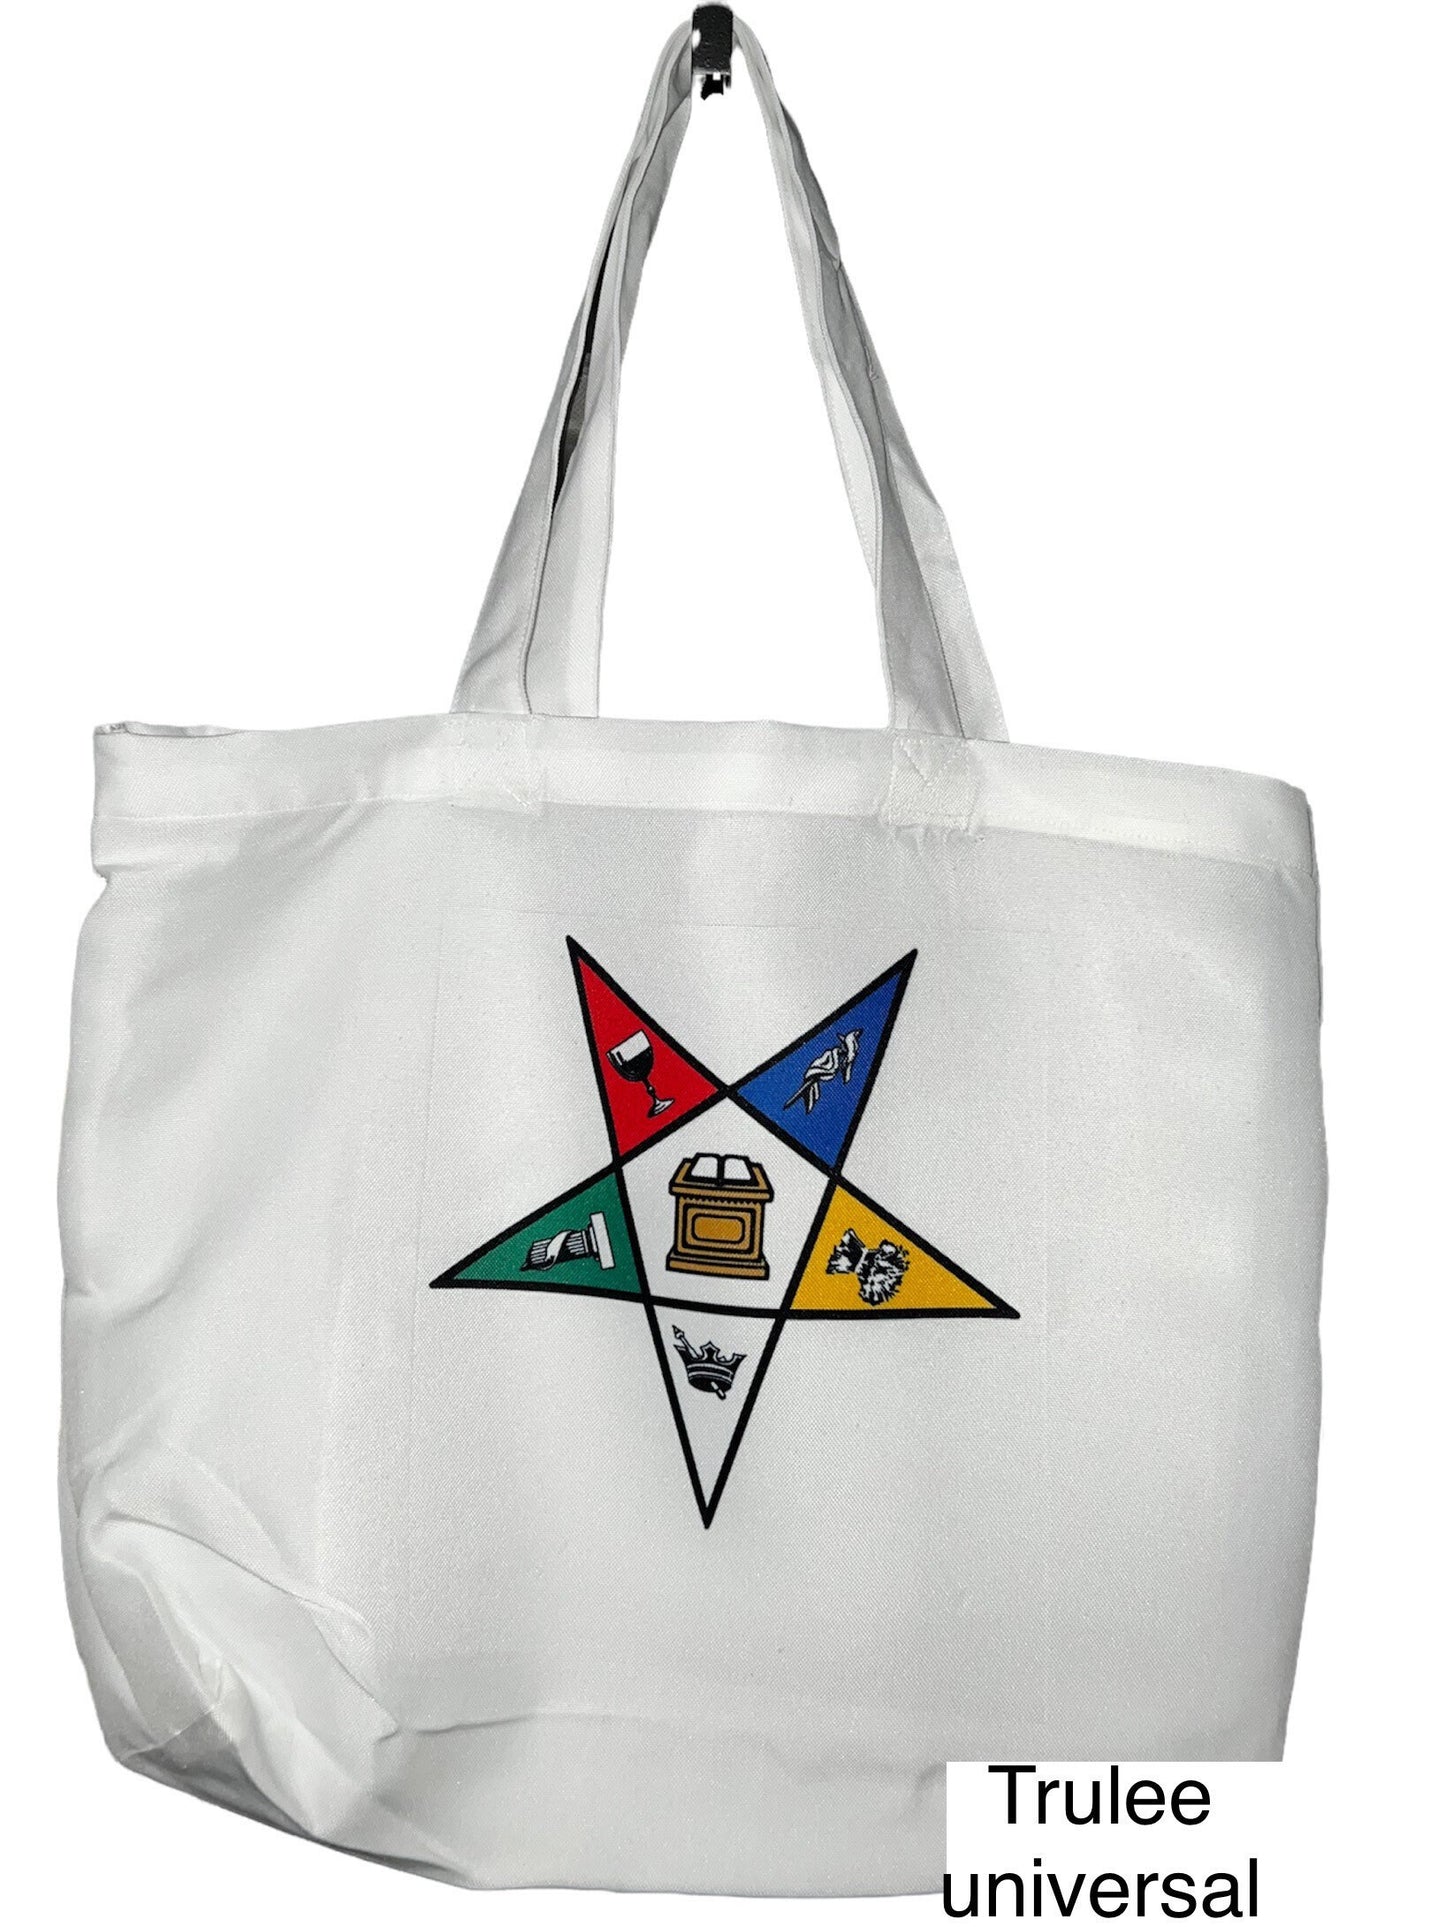 Order of Eastern Star OES White logo tote bag 100% Polyester reusable bag